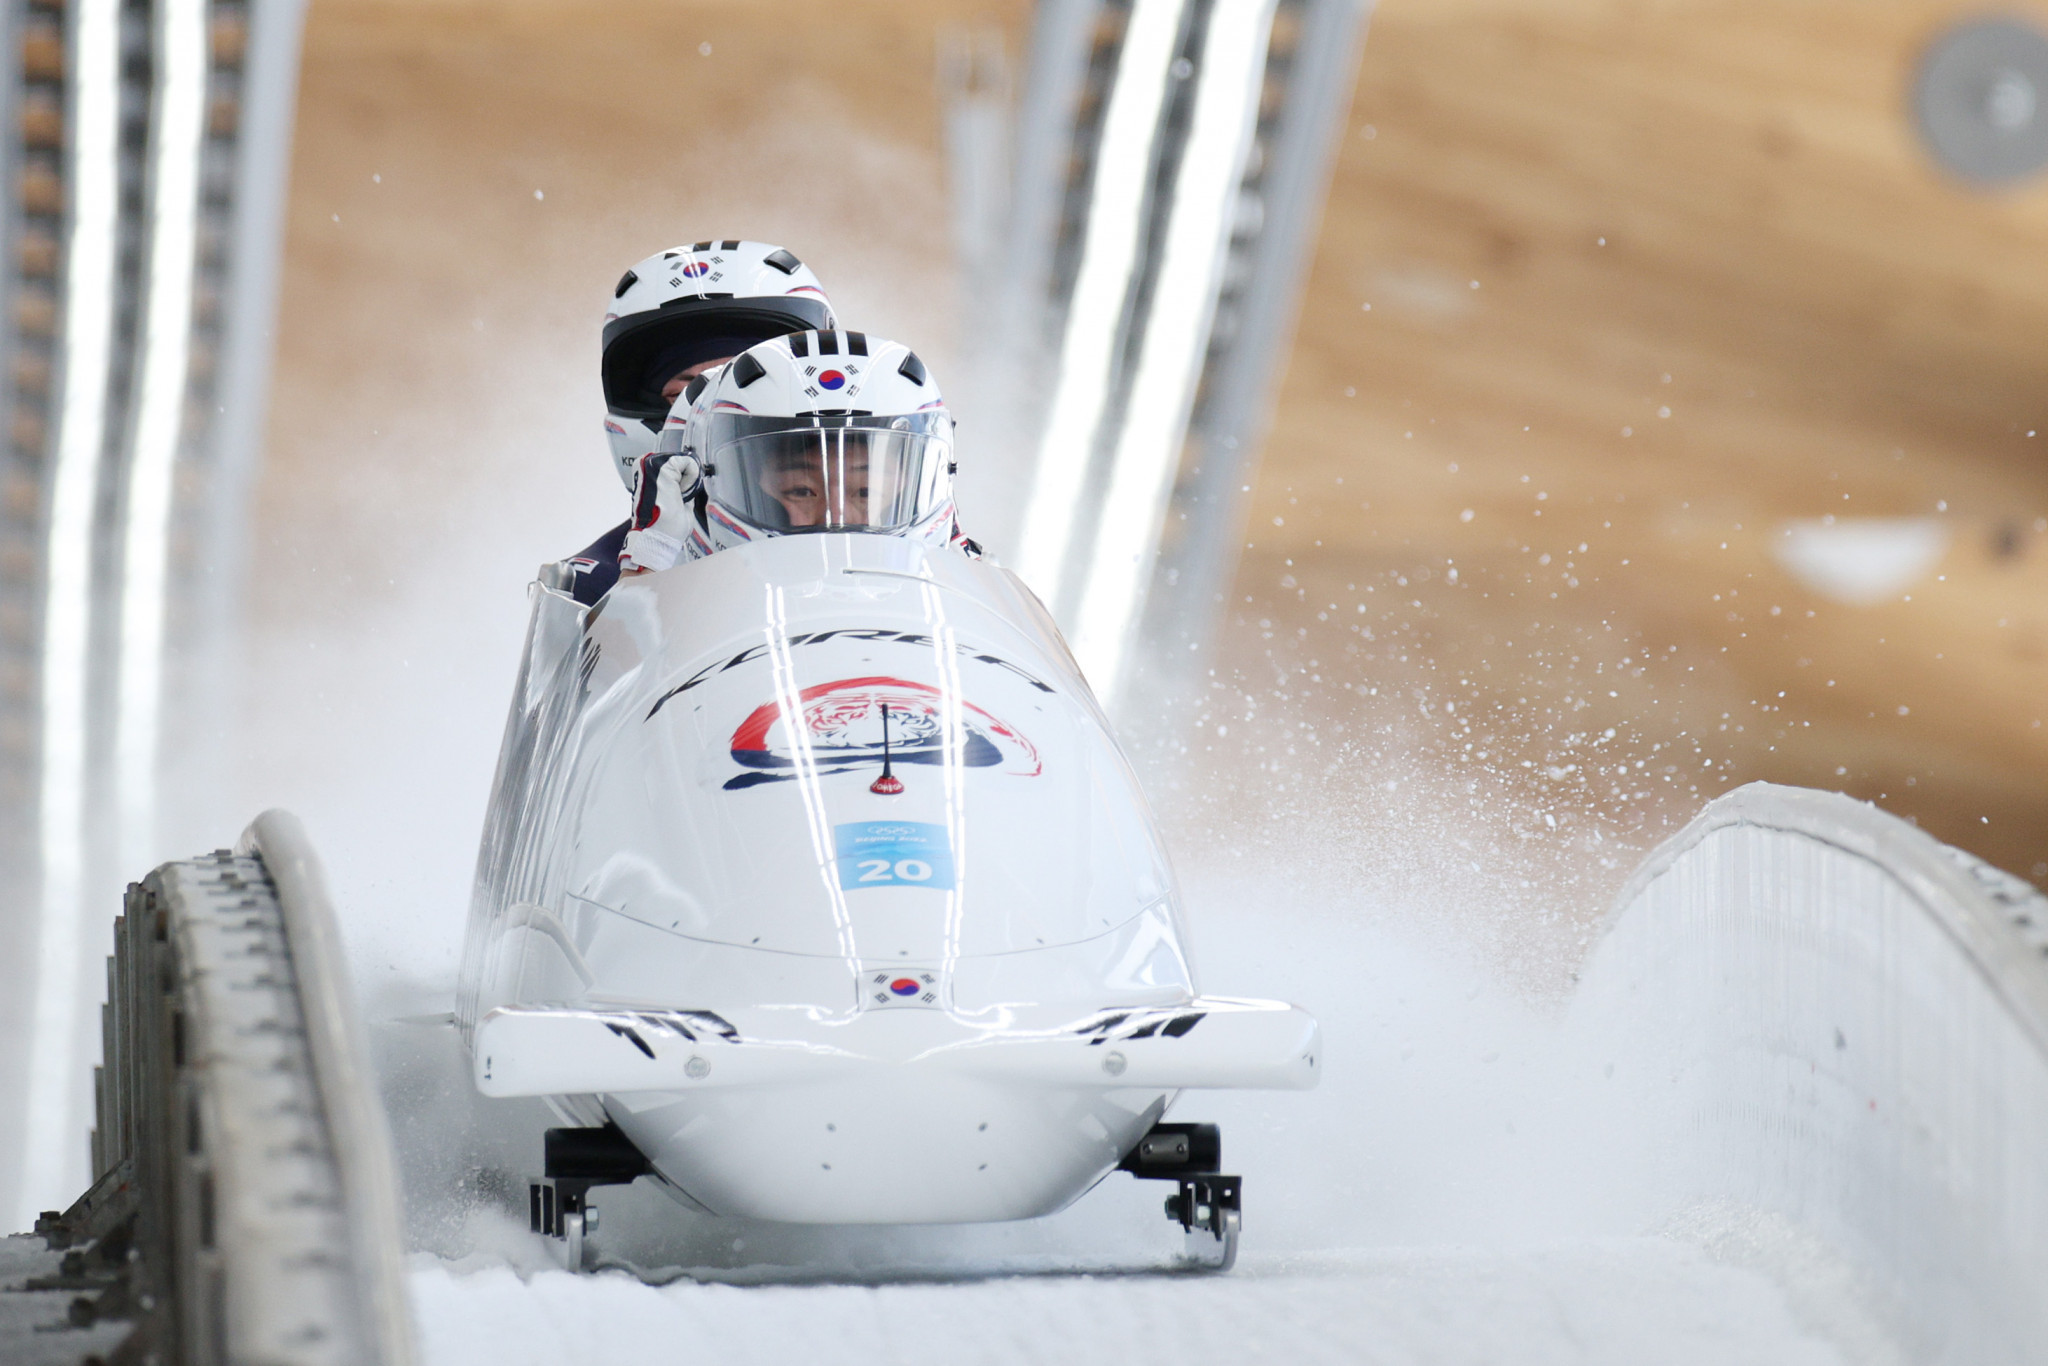 Bobsleigh pilot Won Yun-jong is chair of the Gangwon 2024 Athletes' Commission ©Getty Images